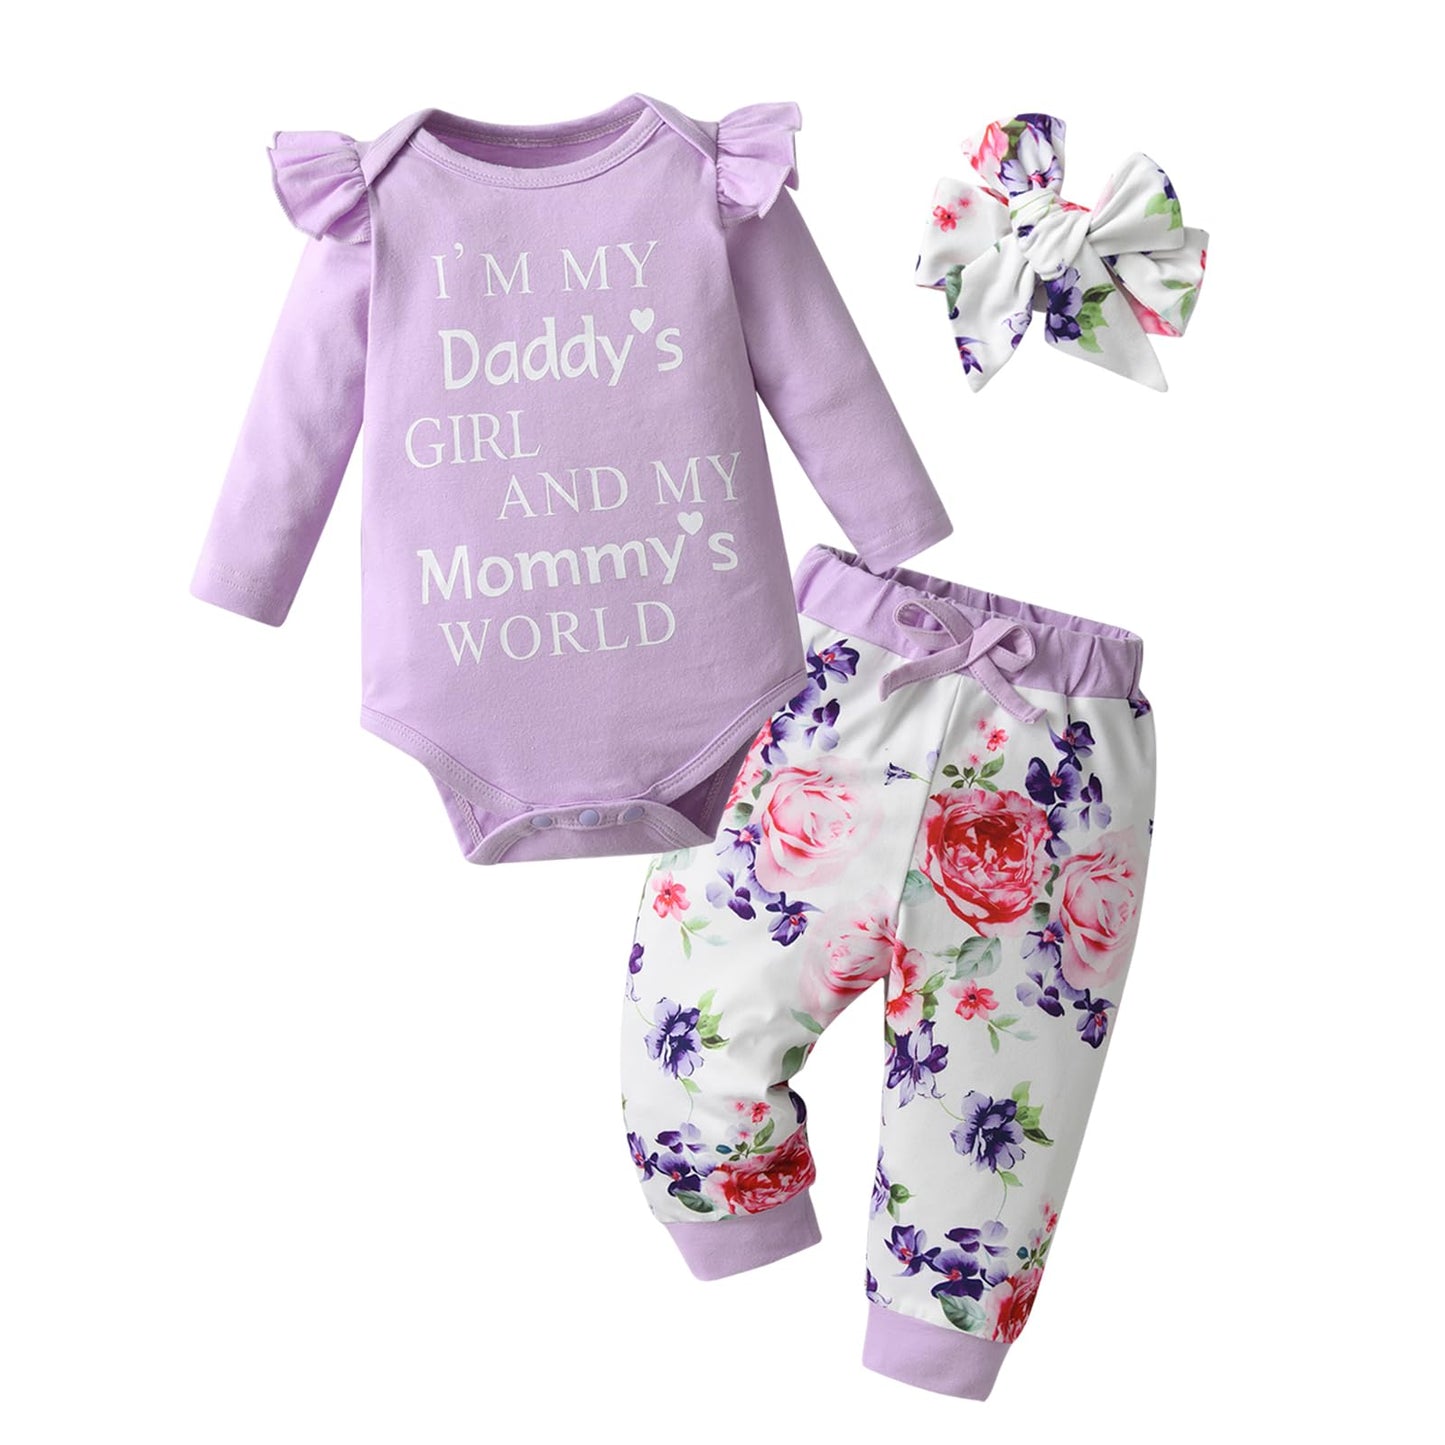 Planooar Baby Clothing Set Baby Girl Clothes Outfit Long Sleeve Letter Print Bodysuit Romper + Pants 3-6 Months